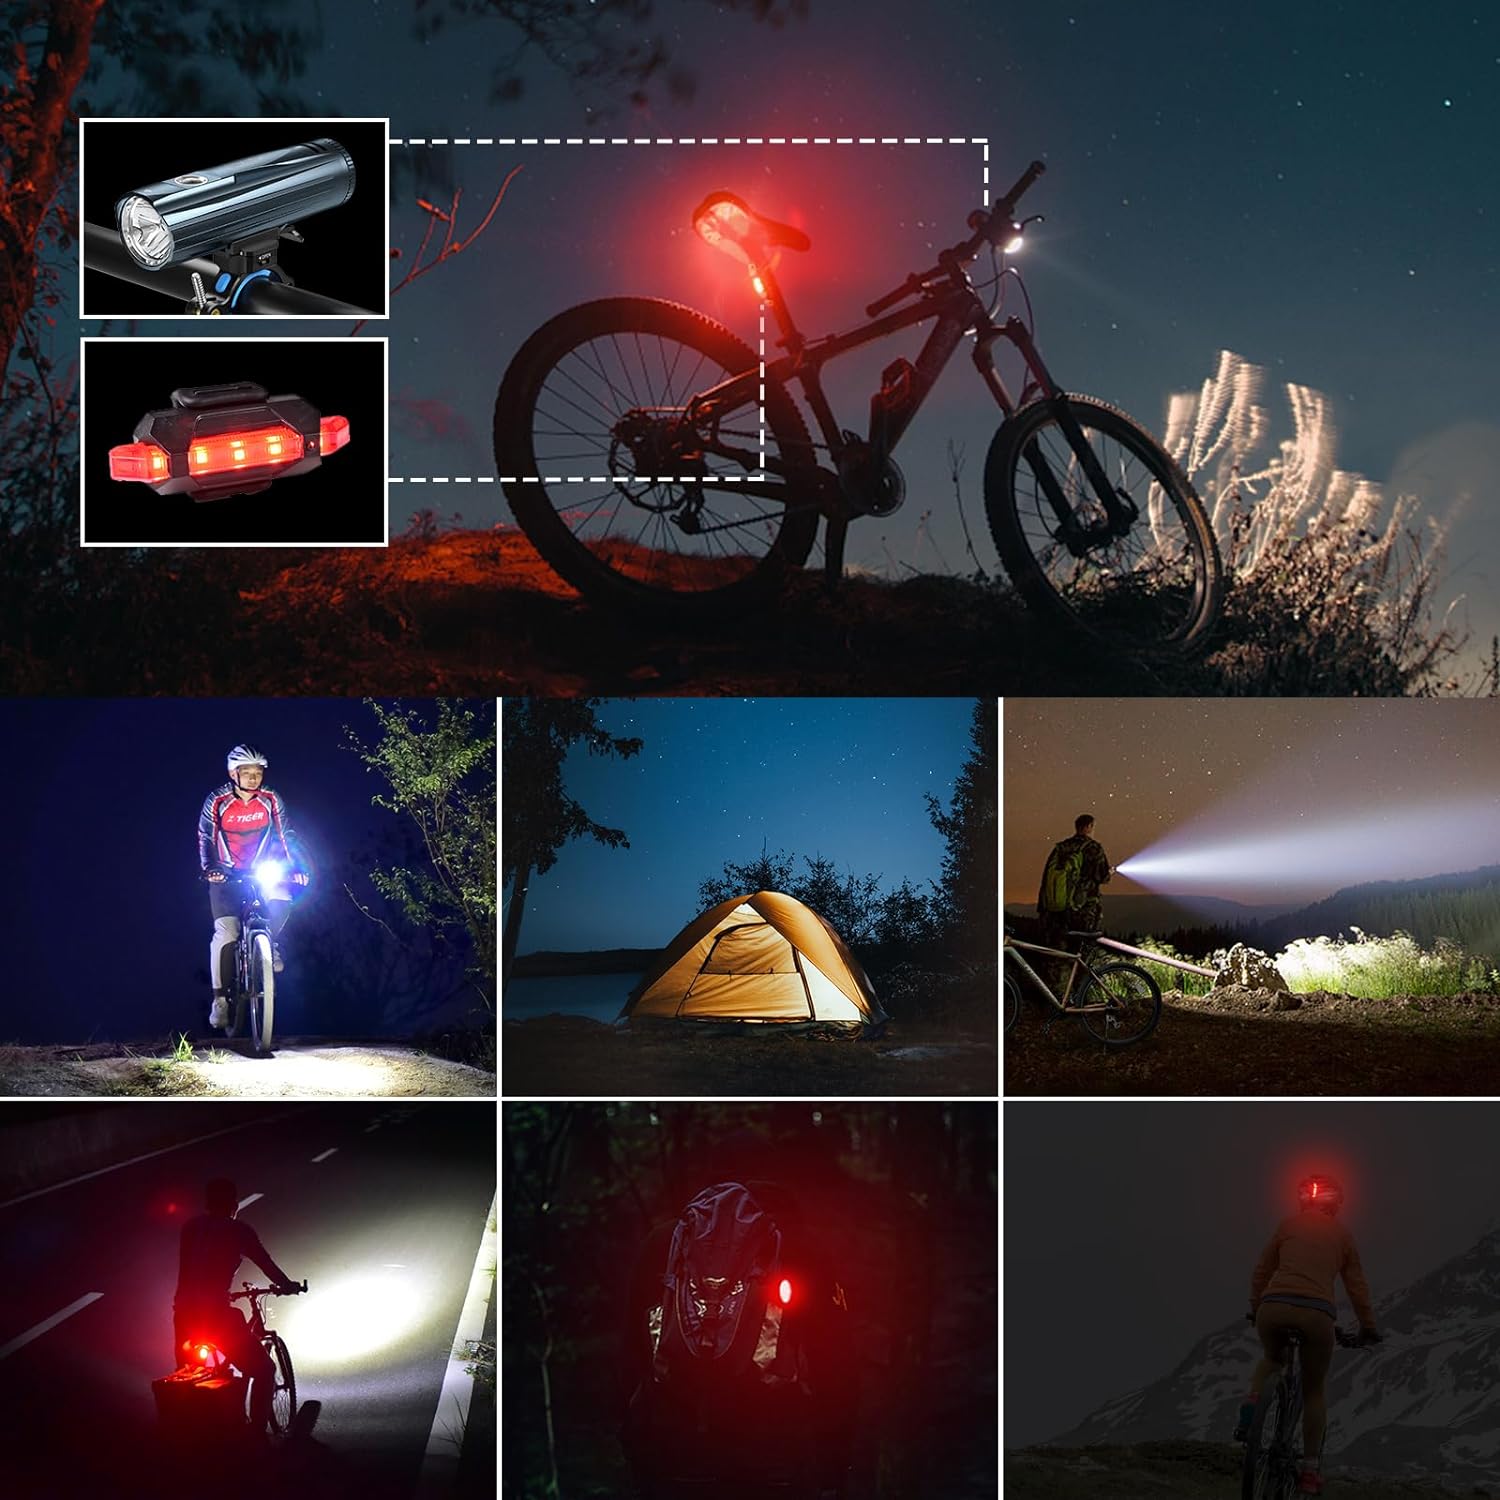 WUBEN B2 Flashlight Rechargeable 1300 Lumen, LED Bike Lights USB-C Rechargeable, Front and Back Flash Light 6 Modes, IP68 Waterproof Bike Headlight Taillight for Outdoor, Hiking, Emergency (Blue)